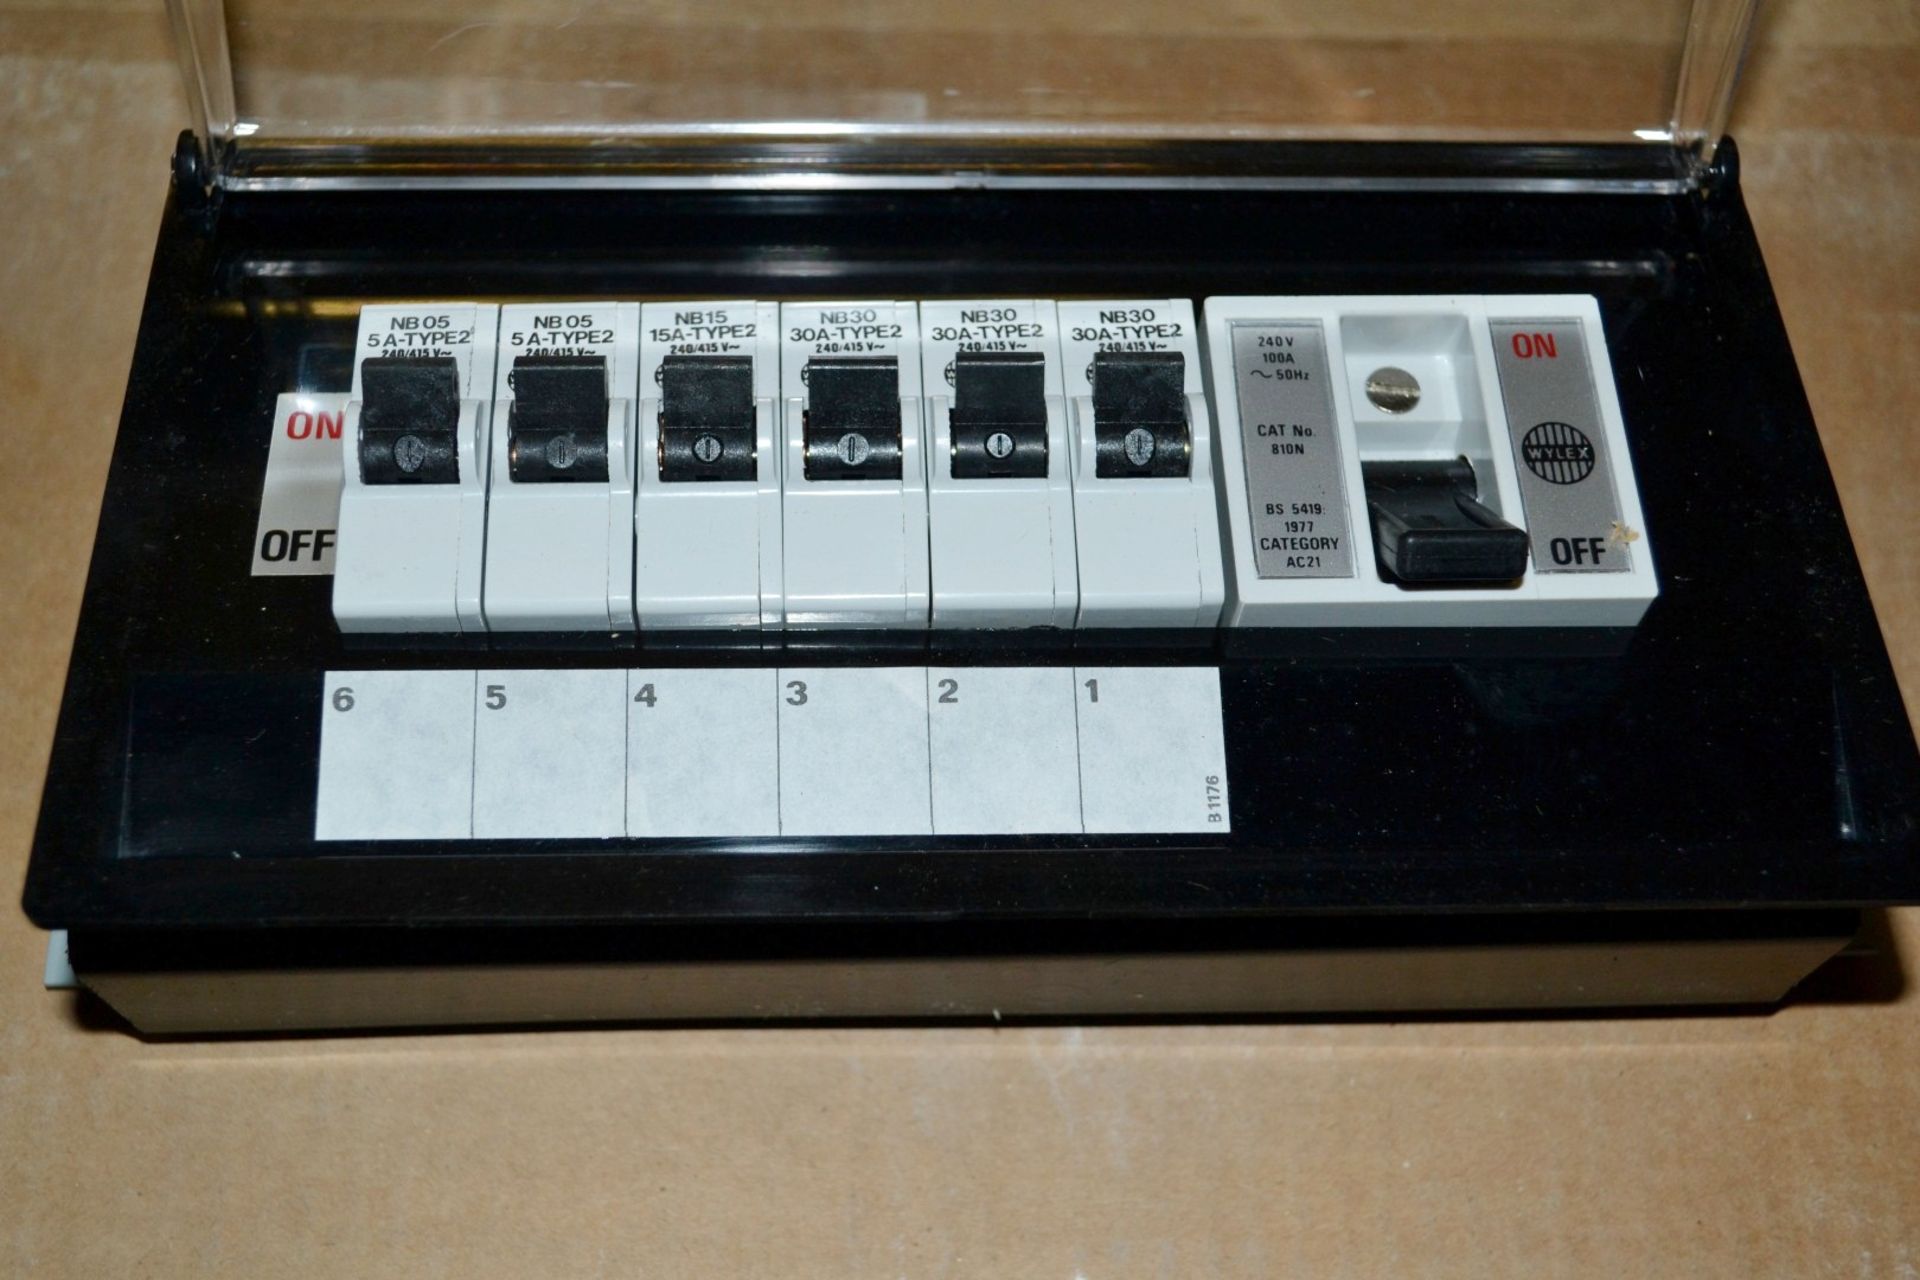 10 x WYLEX Special Interior Fuse Boxes - All Model NN616X - New Boxed Stock - Ref: HM263 - CL403 - - Image 2 of 3